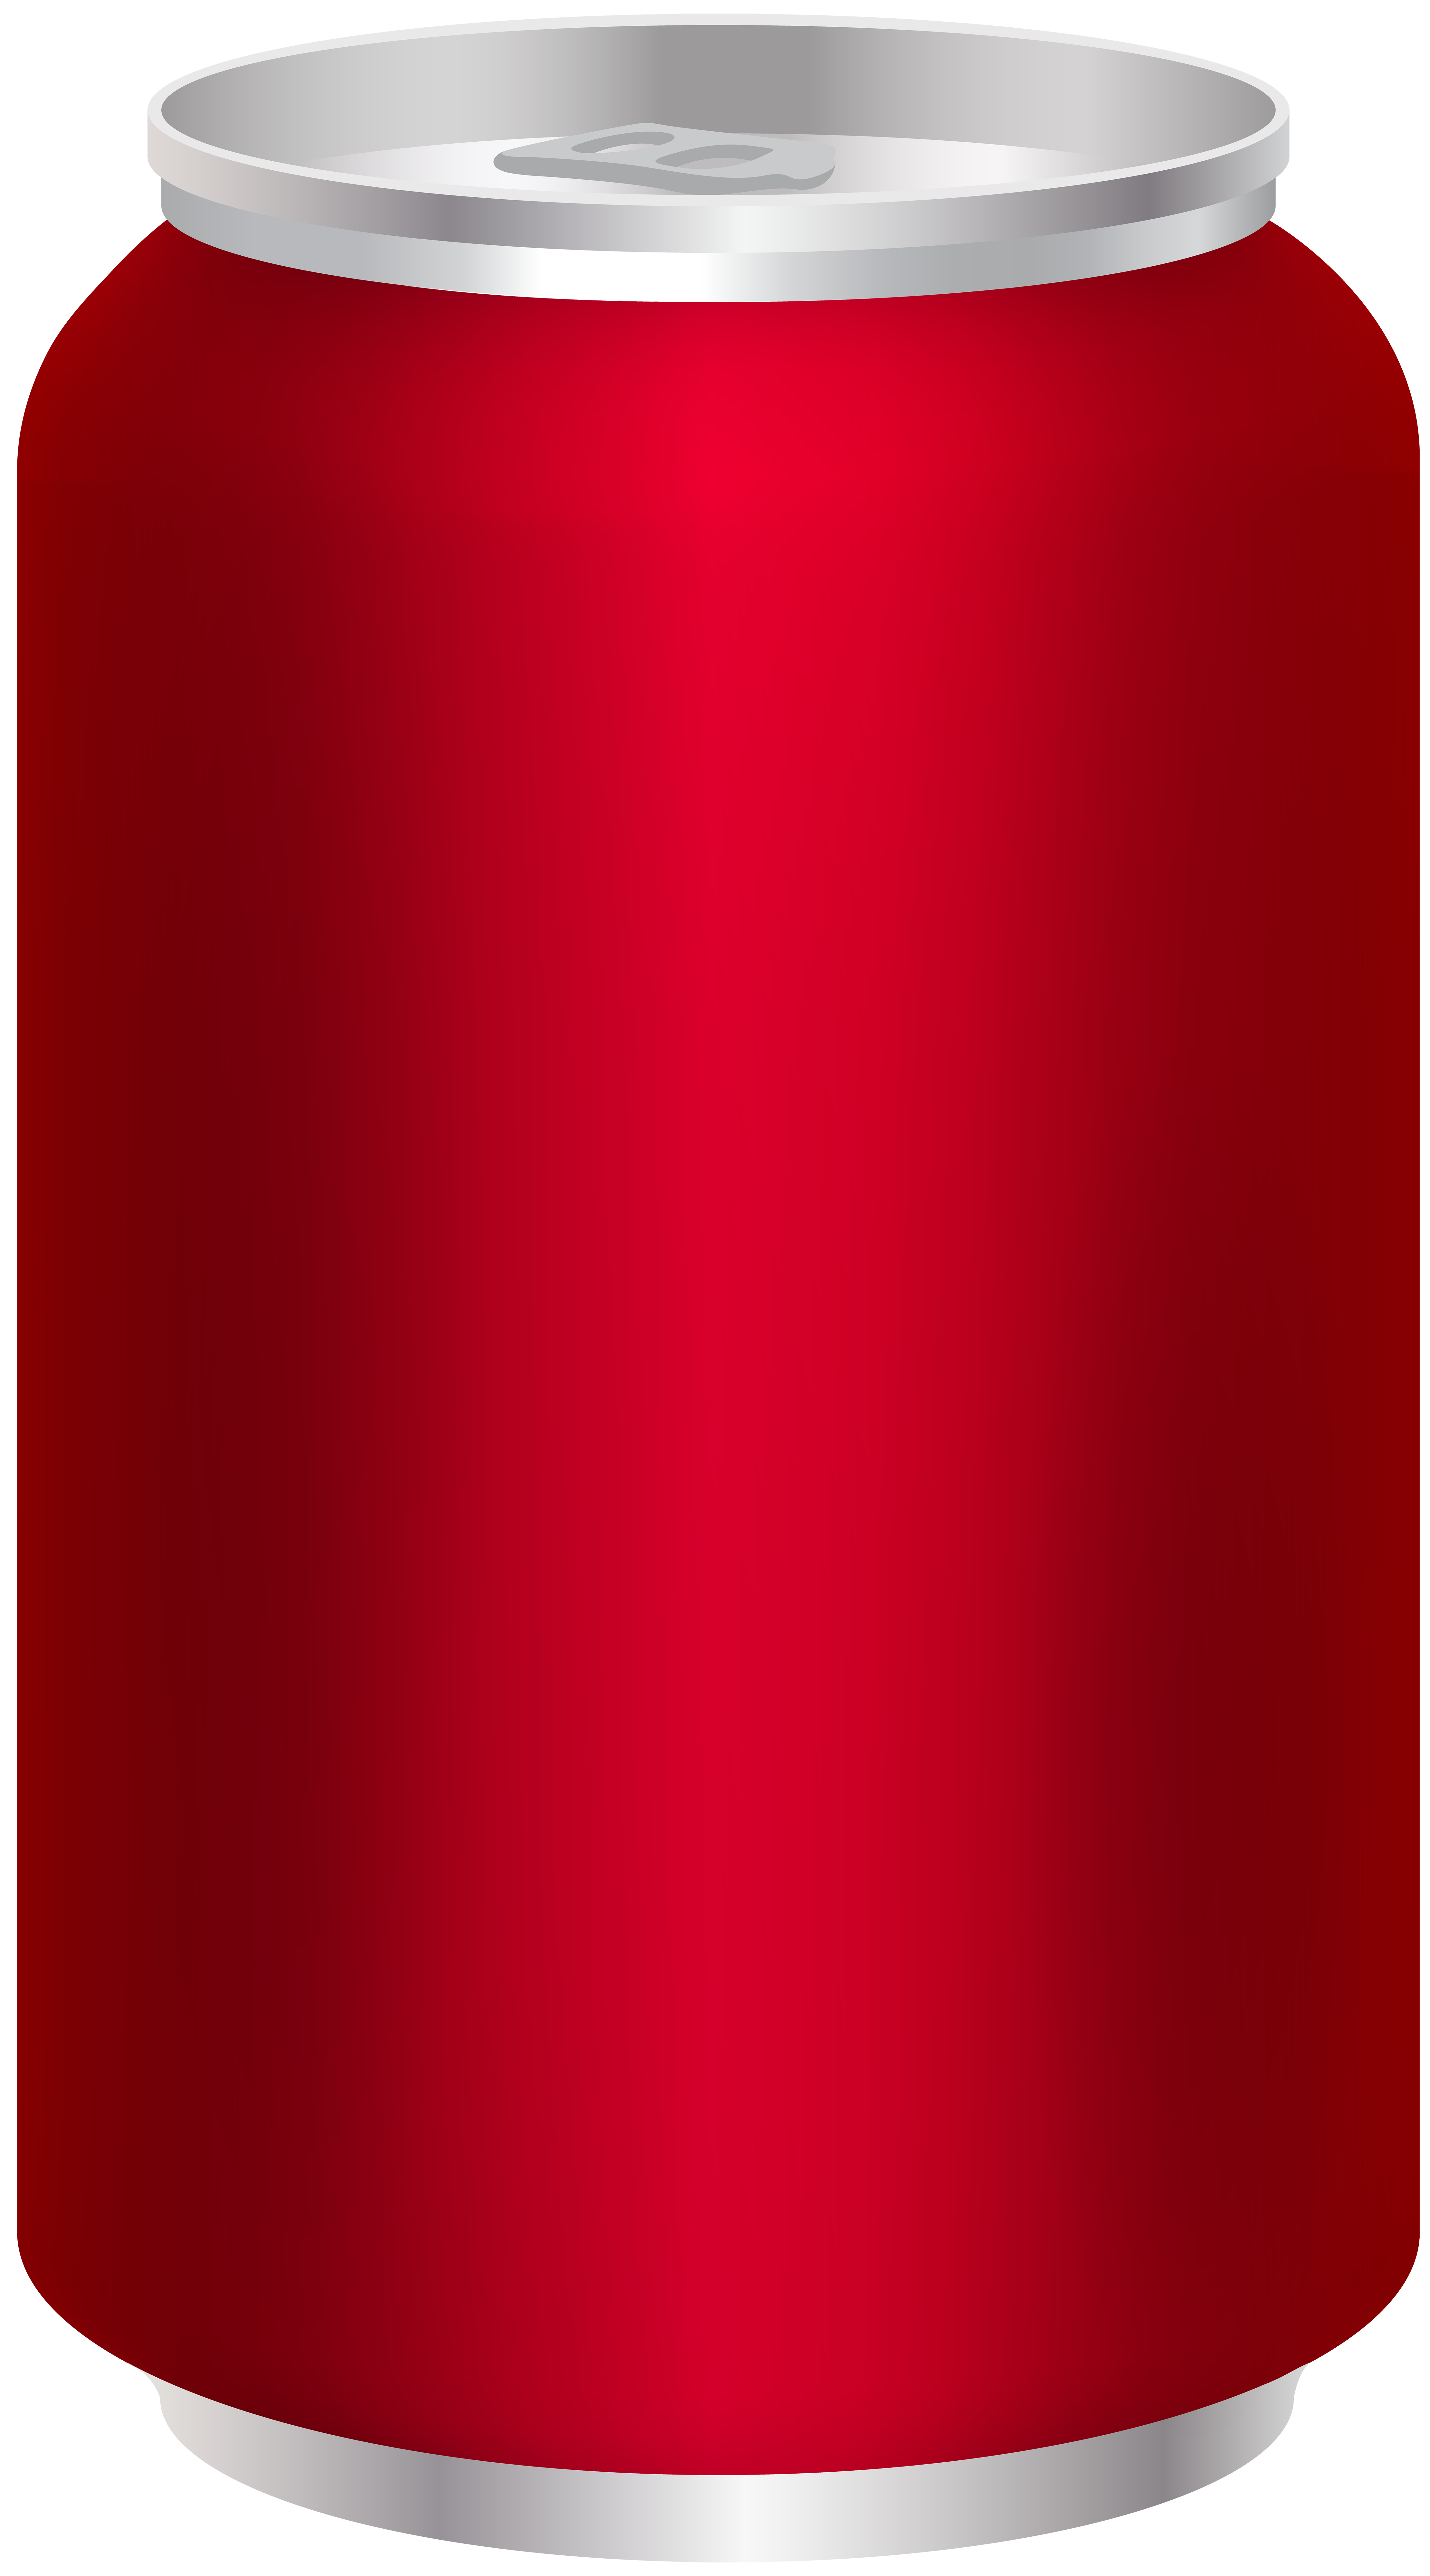 https://gallery.yopriceville.com/var/albums/Free-Clipart-Pictures/Drinks-PNG-/Soda_Can_Red_Clip_Art_Image.png?m=1519692629